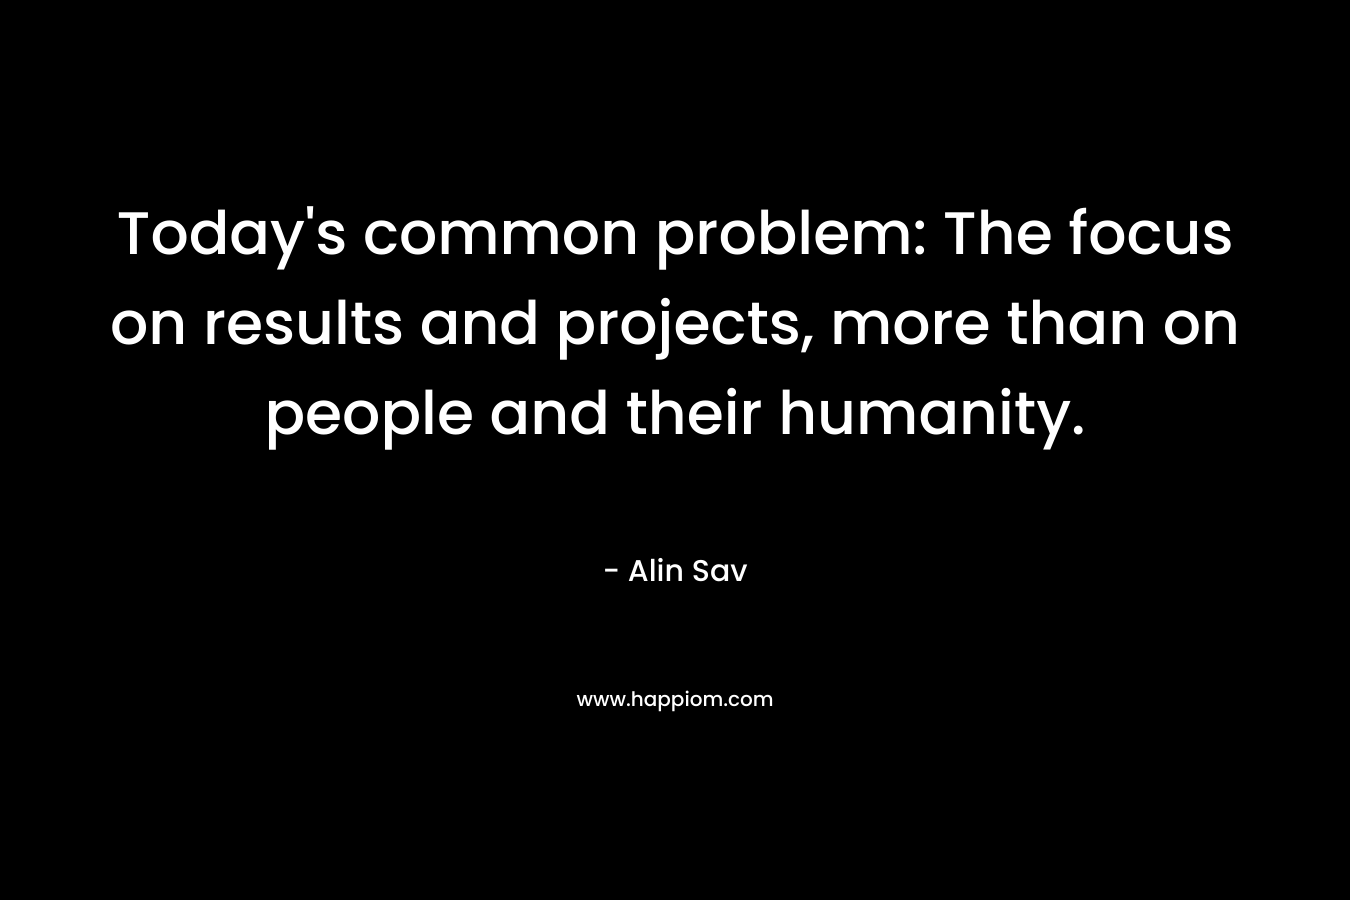 Today's common problem: The focus on results and projects, more than on people and their humanity.